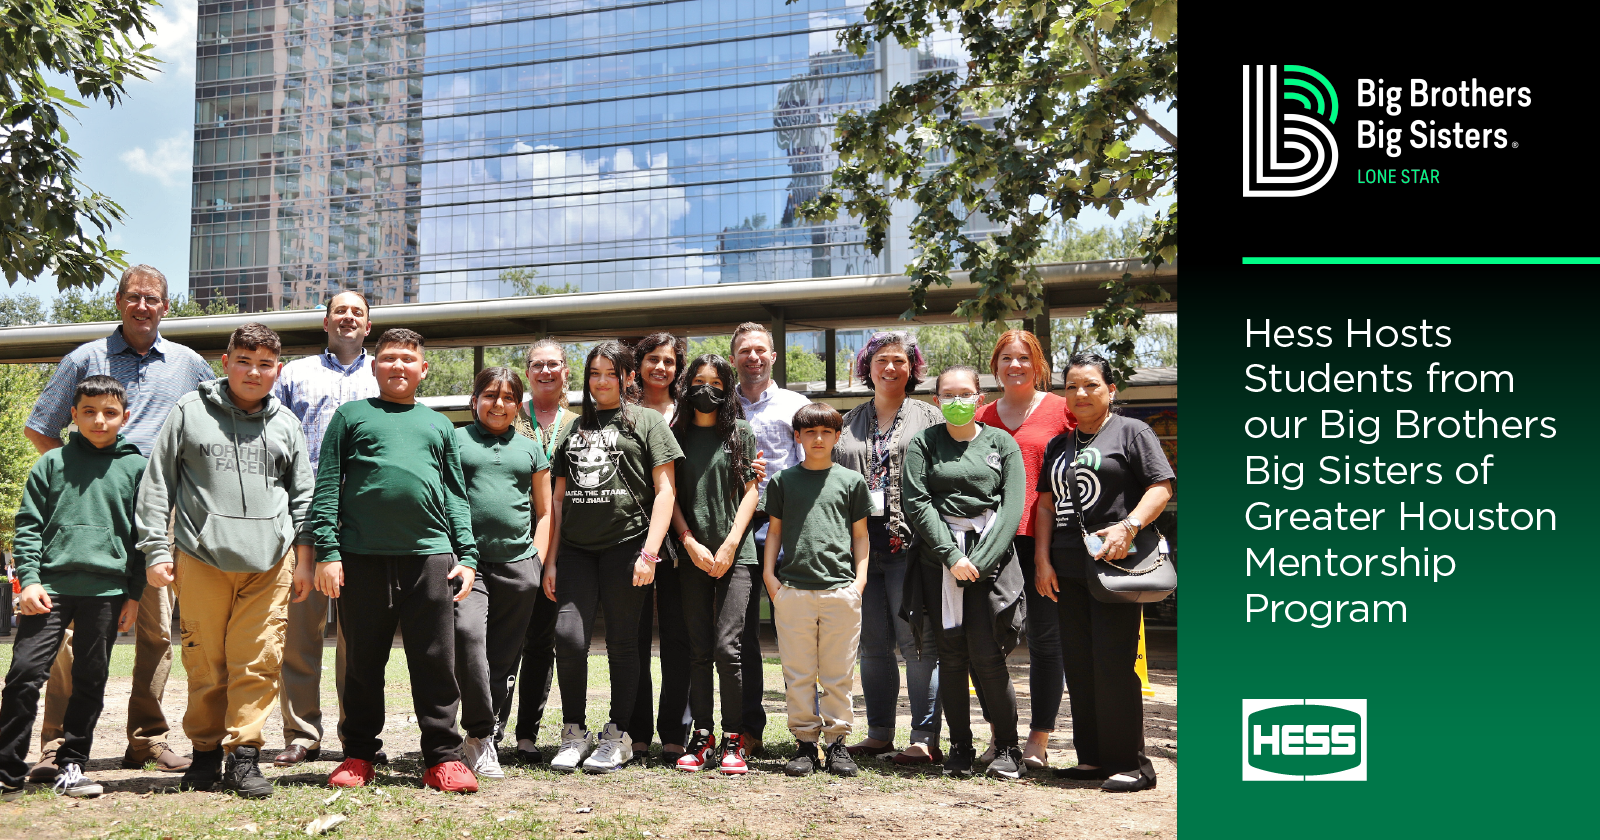 Hess Hosts Students from BBBS of Greater Houston